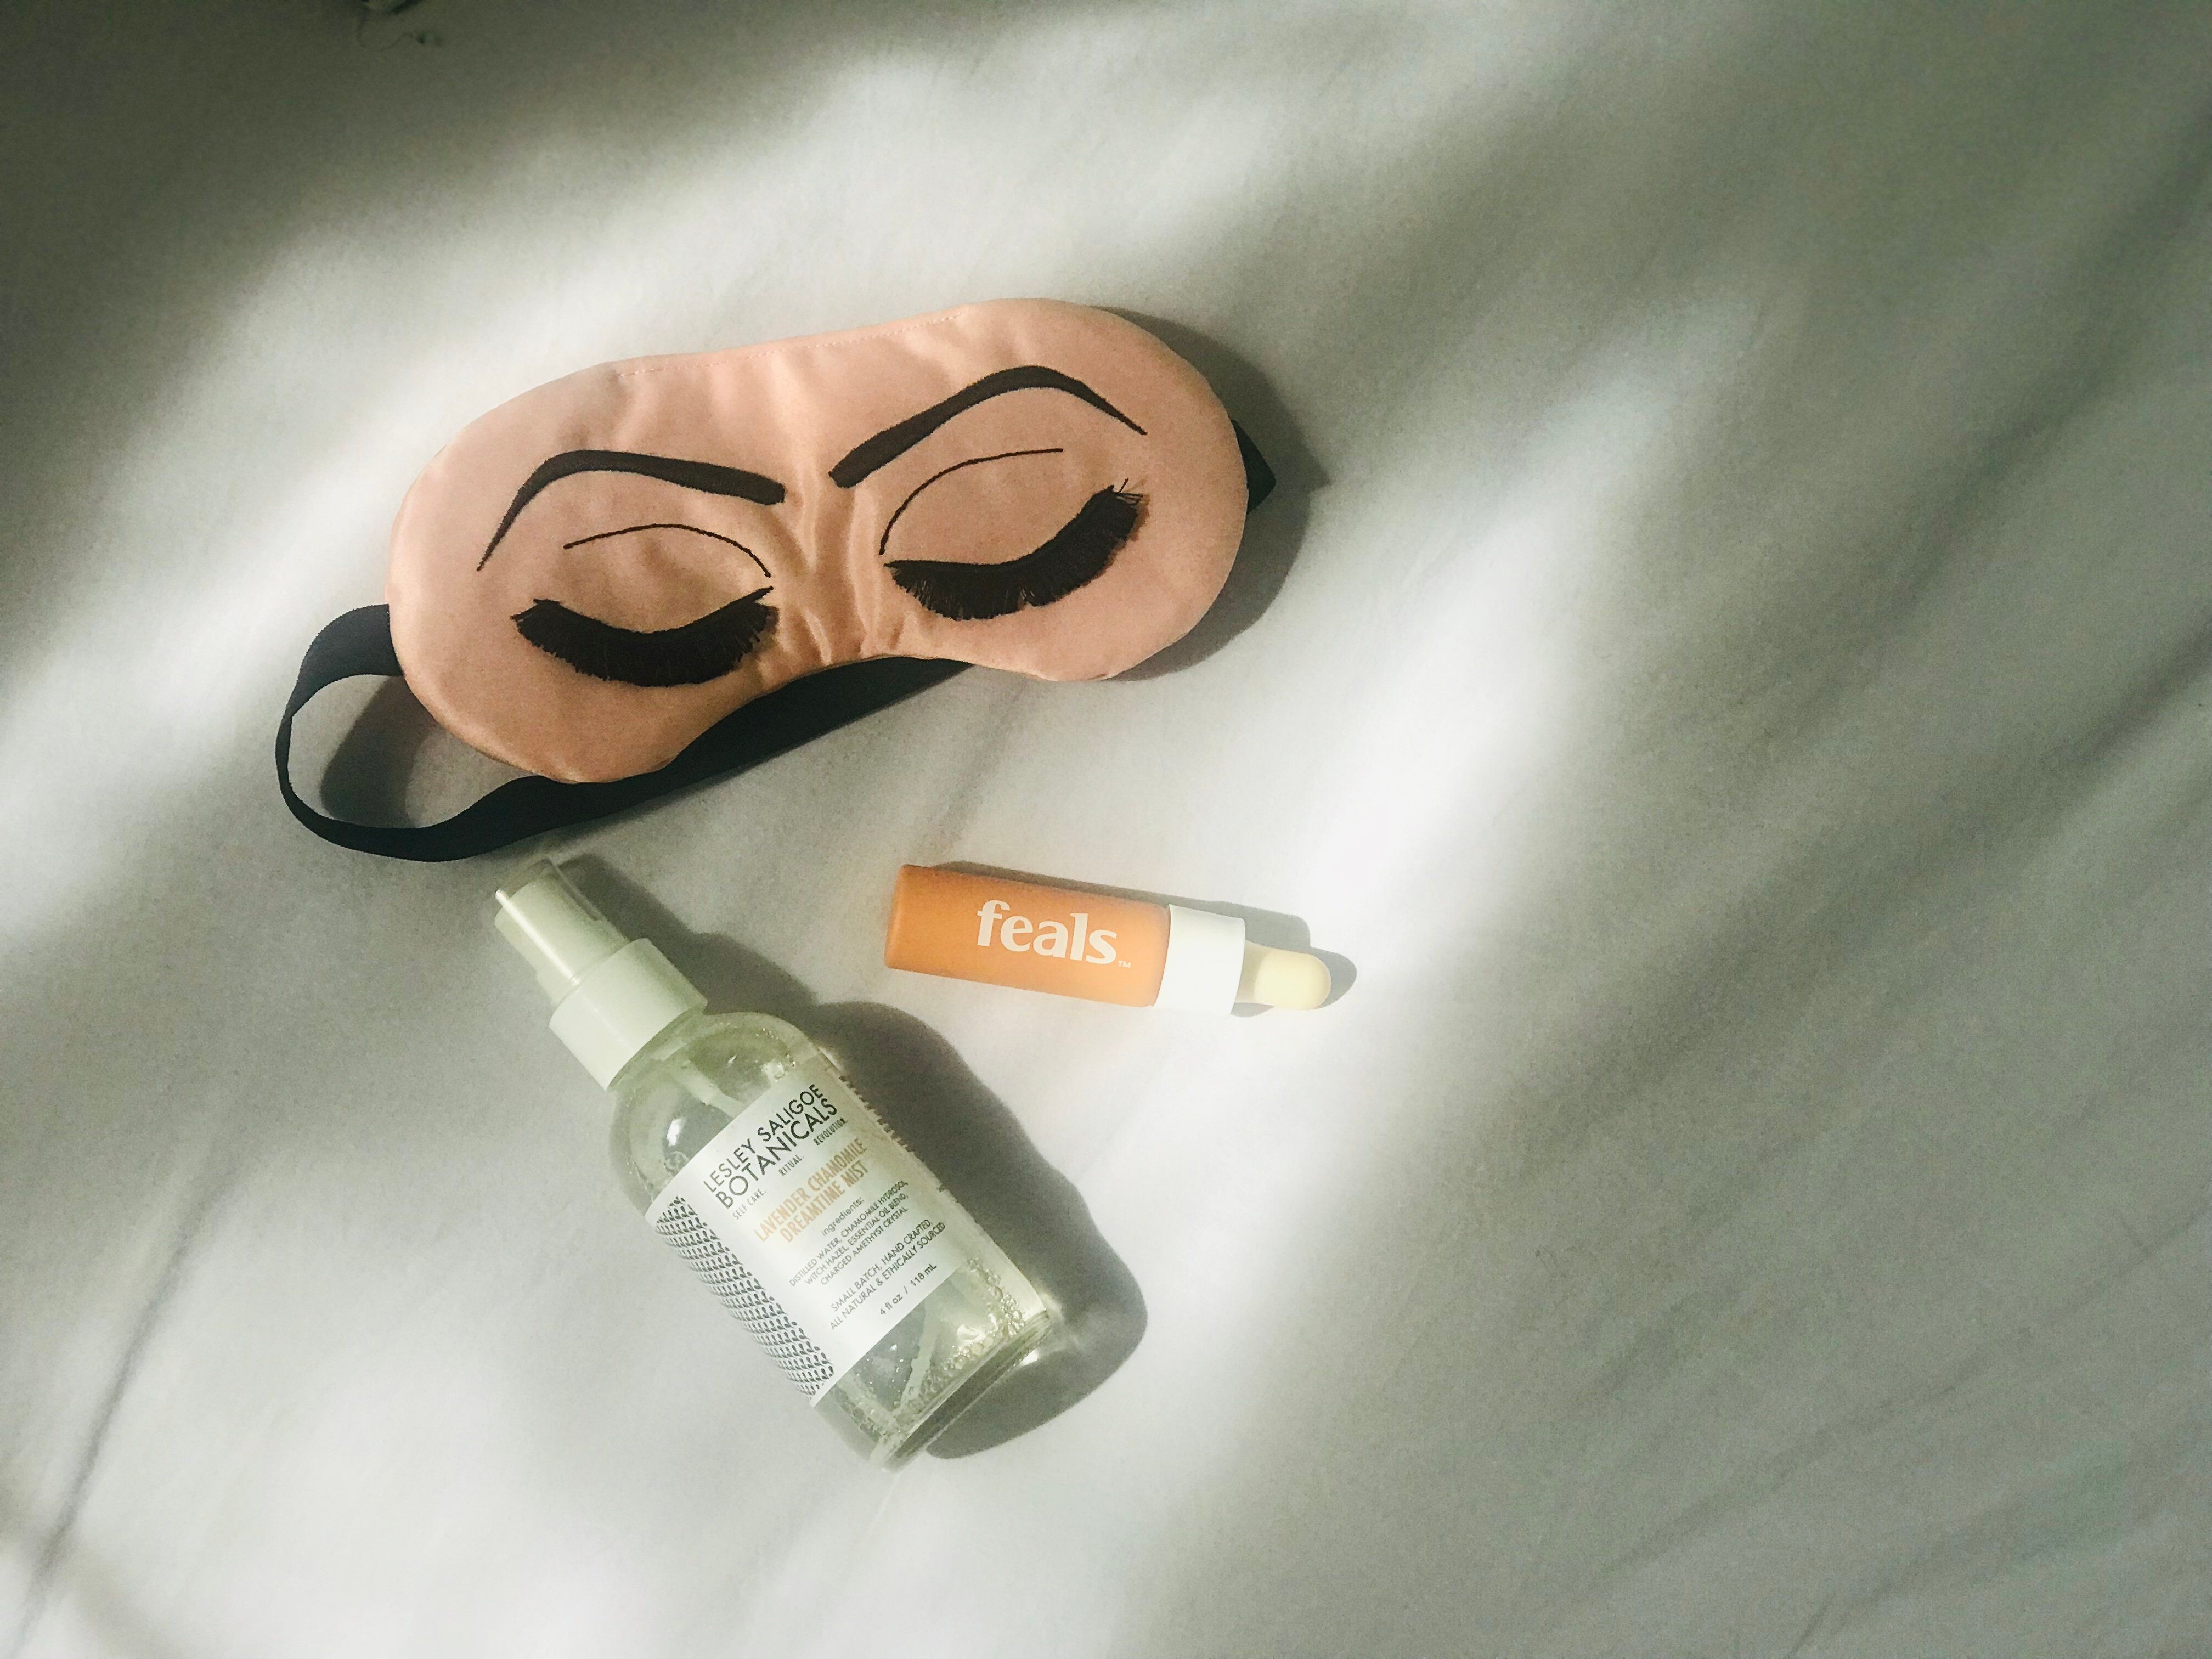 feals on a bed with and eye mask and skin care